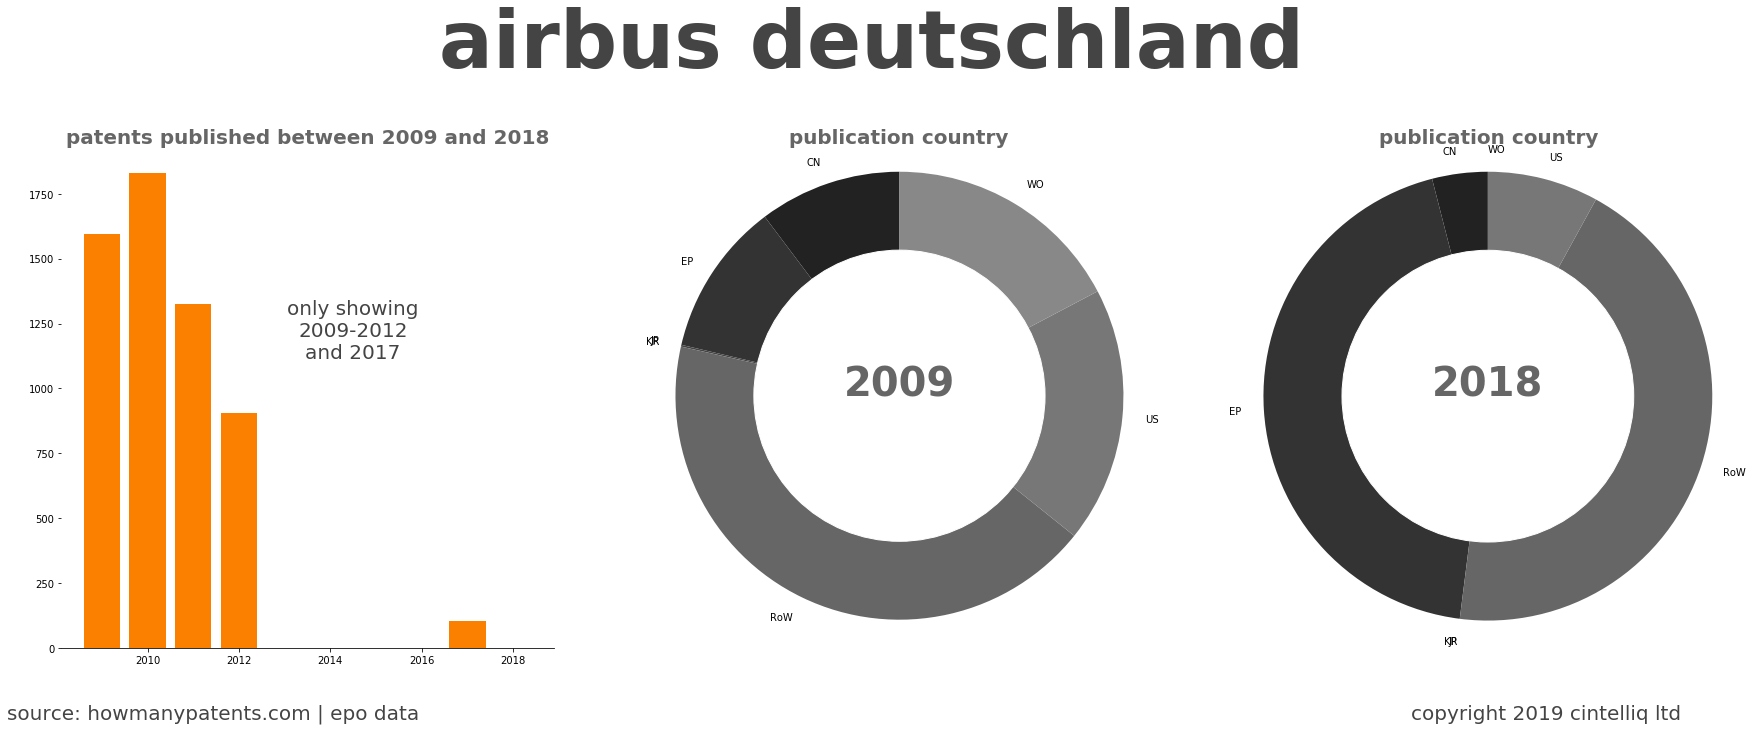 summary of patents for Airbus Deutschland